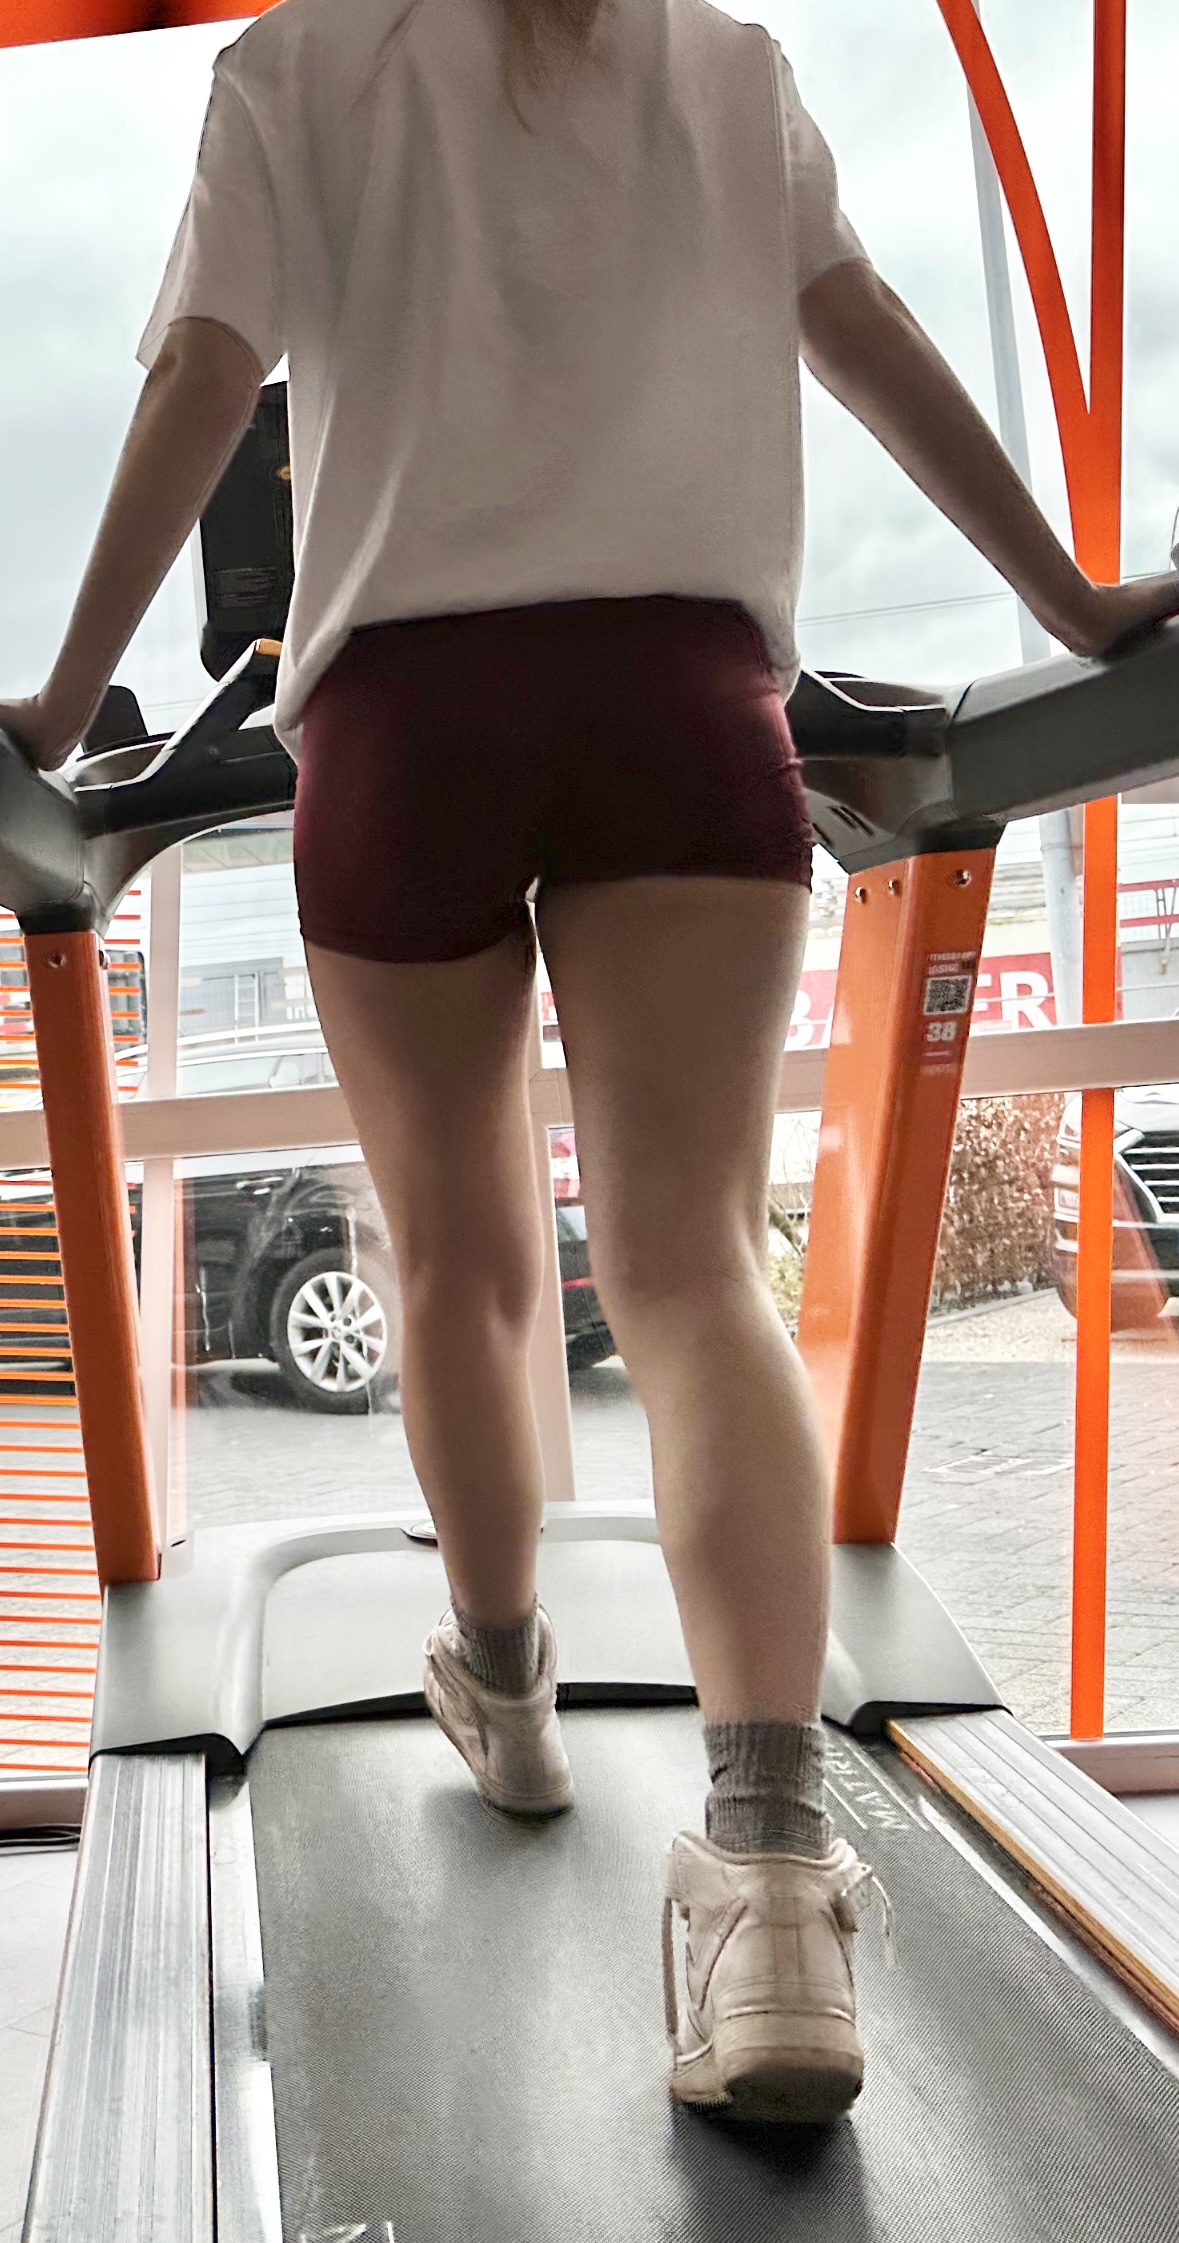 Perfect ass and cameltoe in gym - Short Shorts & Volleyball - Forum